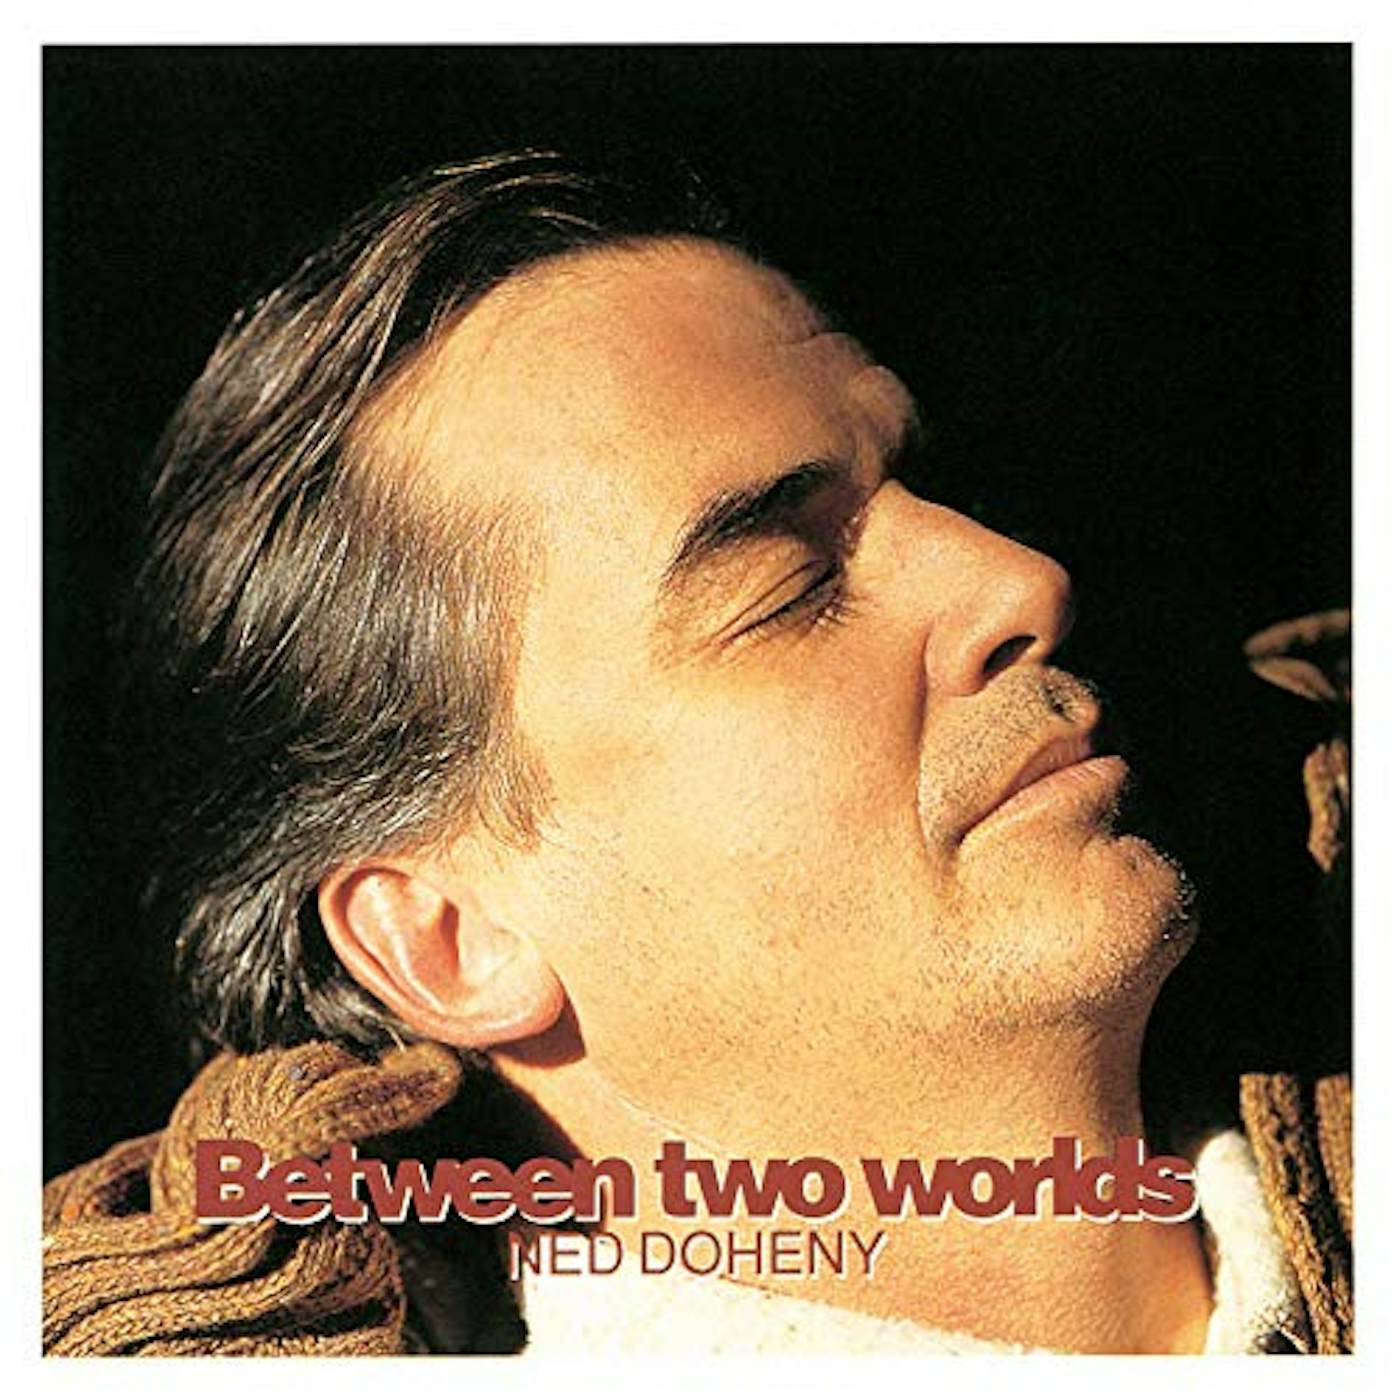 Ned Doheny BETWEEN TWO WORLDS CD